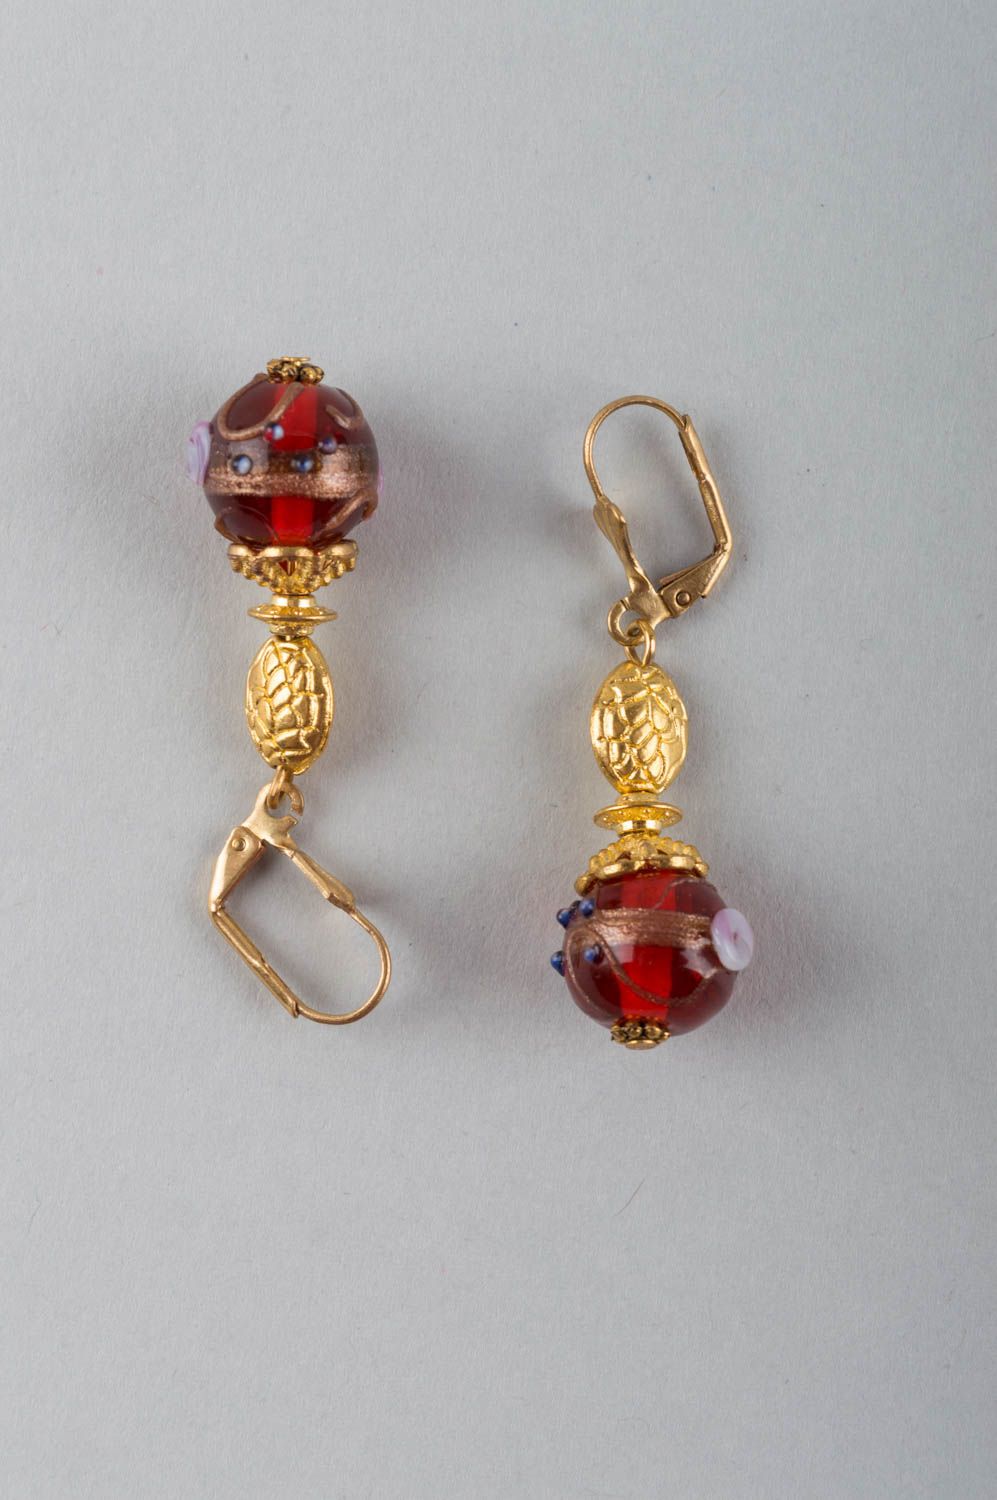 Handmade luxurious dangling earrings with golden colored basis and mural glass photo 2